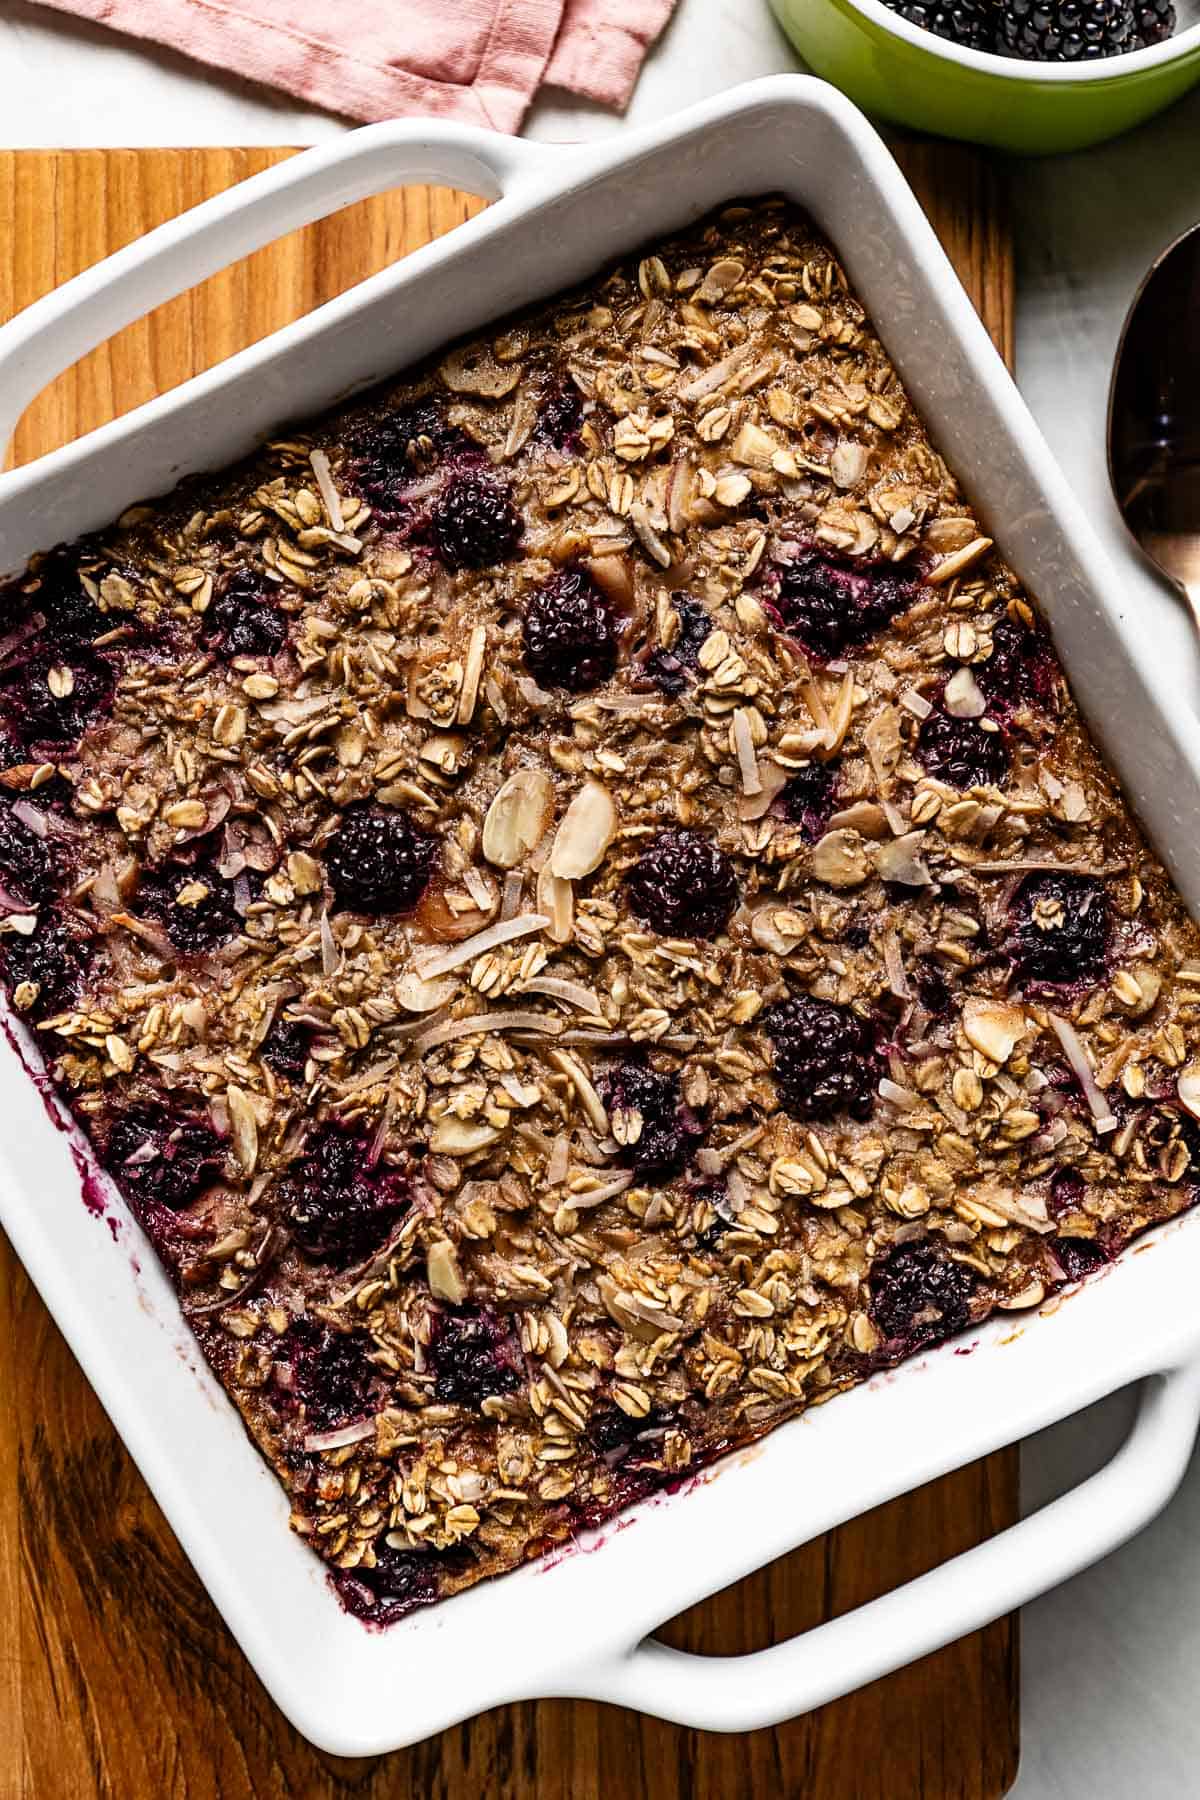 Baked Blackberry Oatmeal in a square baking dish from the top view.